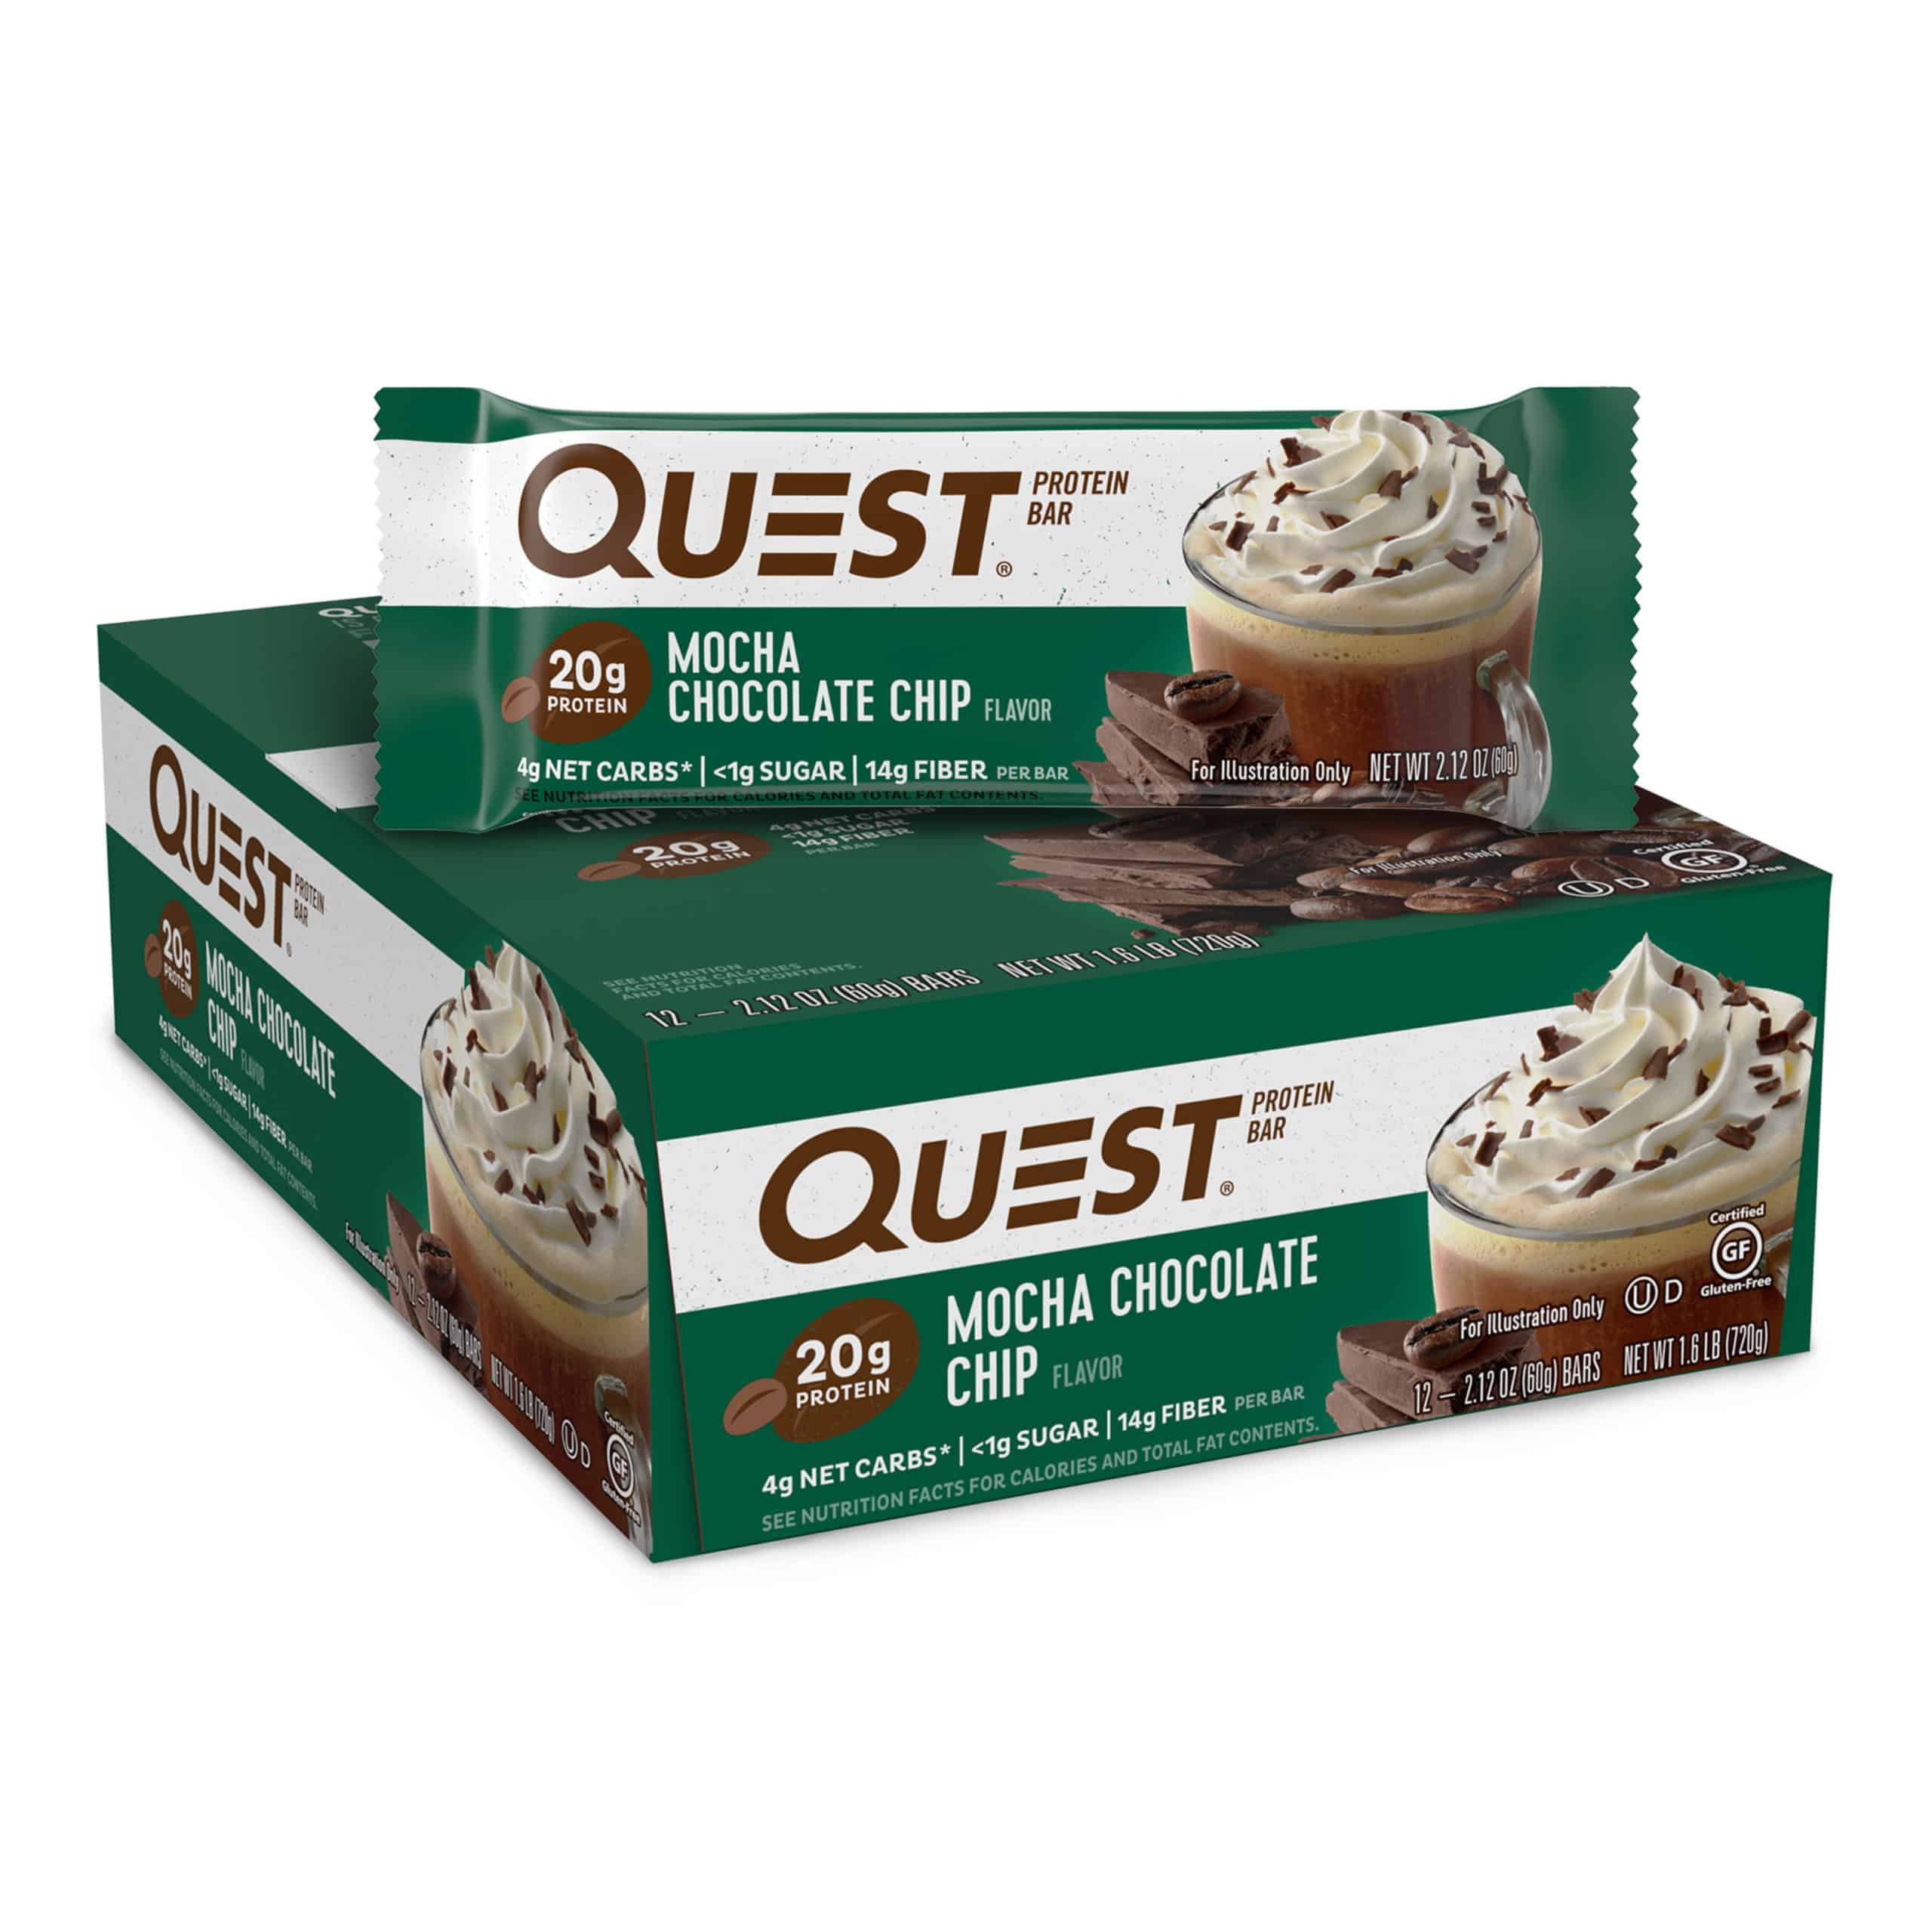 Quest Protein Bar, Mocha Chocolate Chip, 20g Protein, 12 Ct